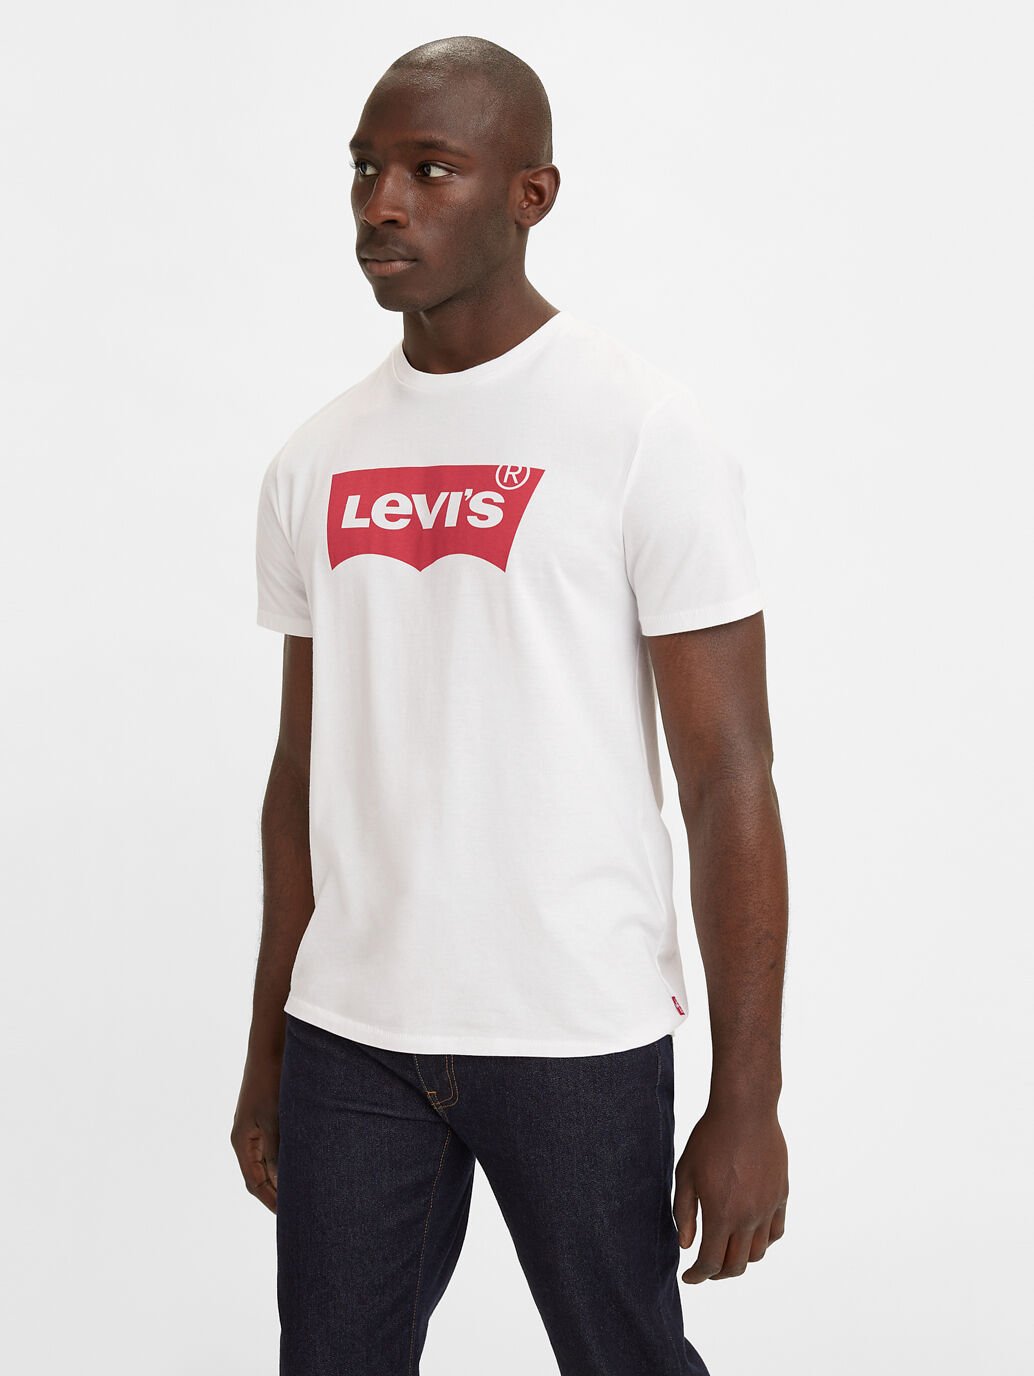 levi's red white and blue shirt